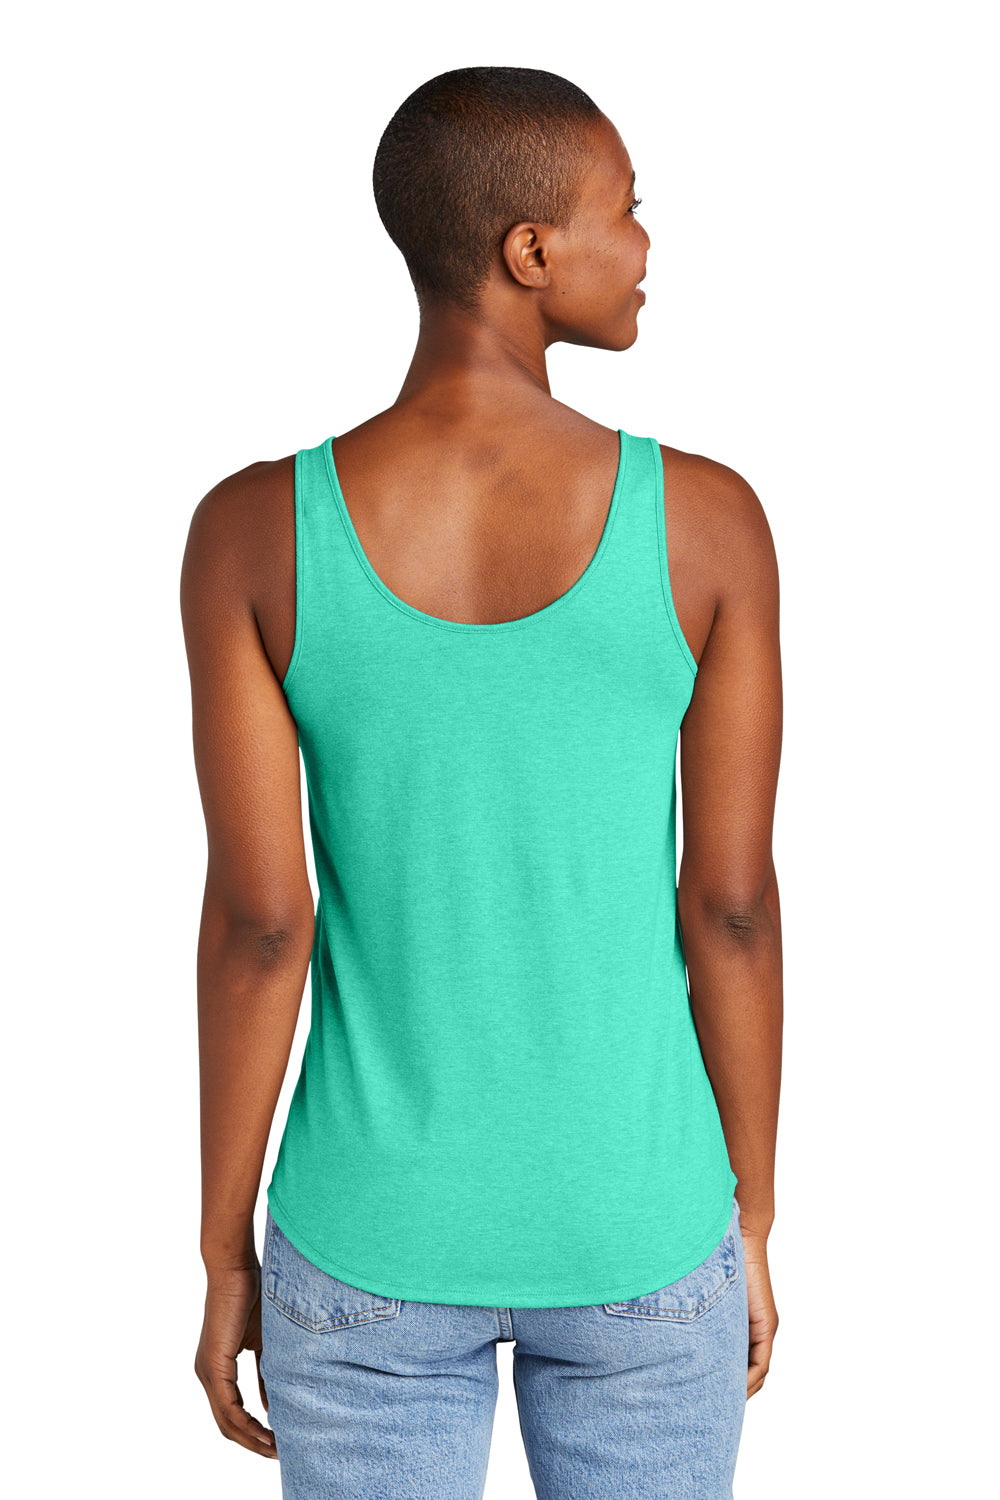 District DT151 Womens Perfect Tri Relaxed Tank Top Heather Aqua Blue Back